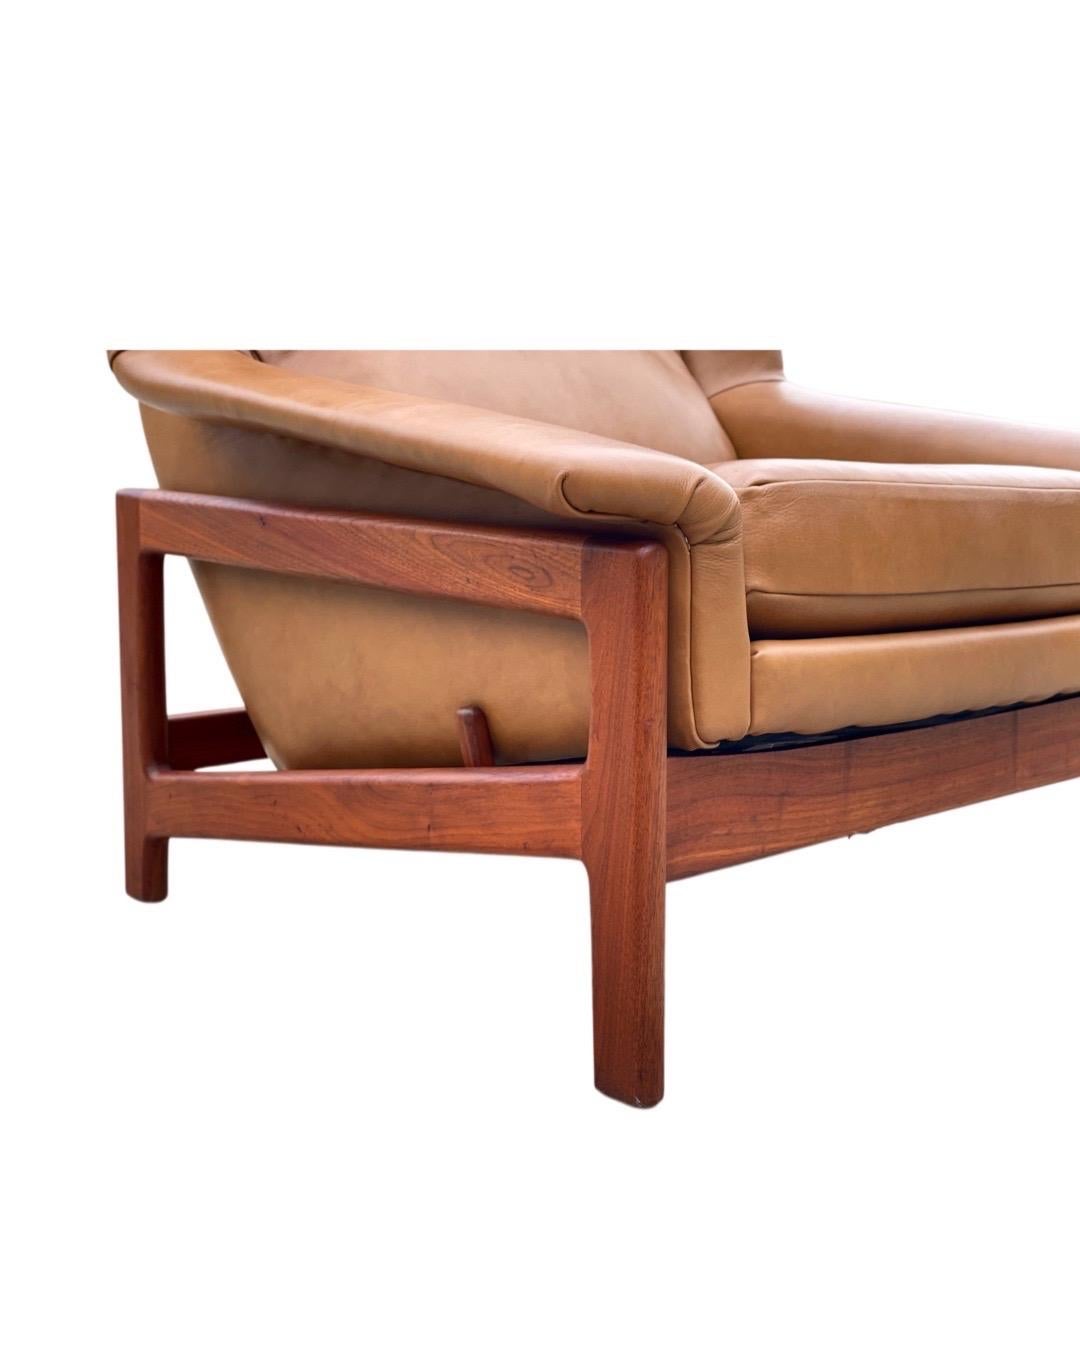 Mid-Century Modern Folke Ohlsson for DUX Reclining + Rocking Lounge Chair in Leather + Walnut